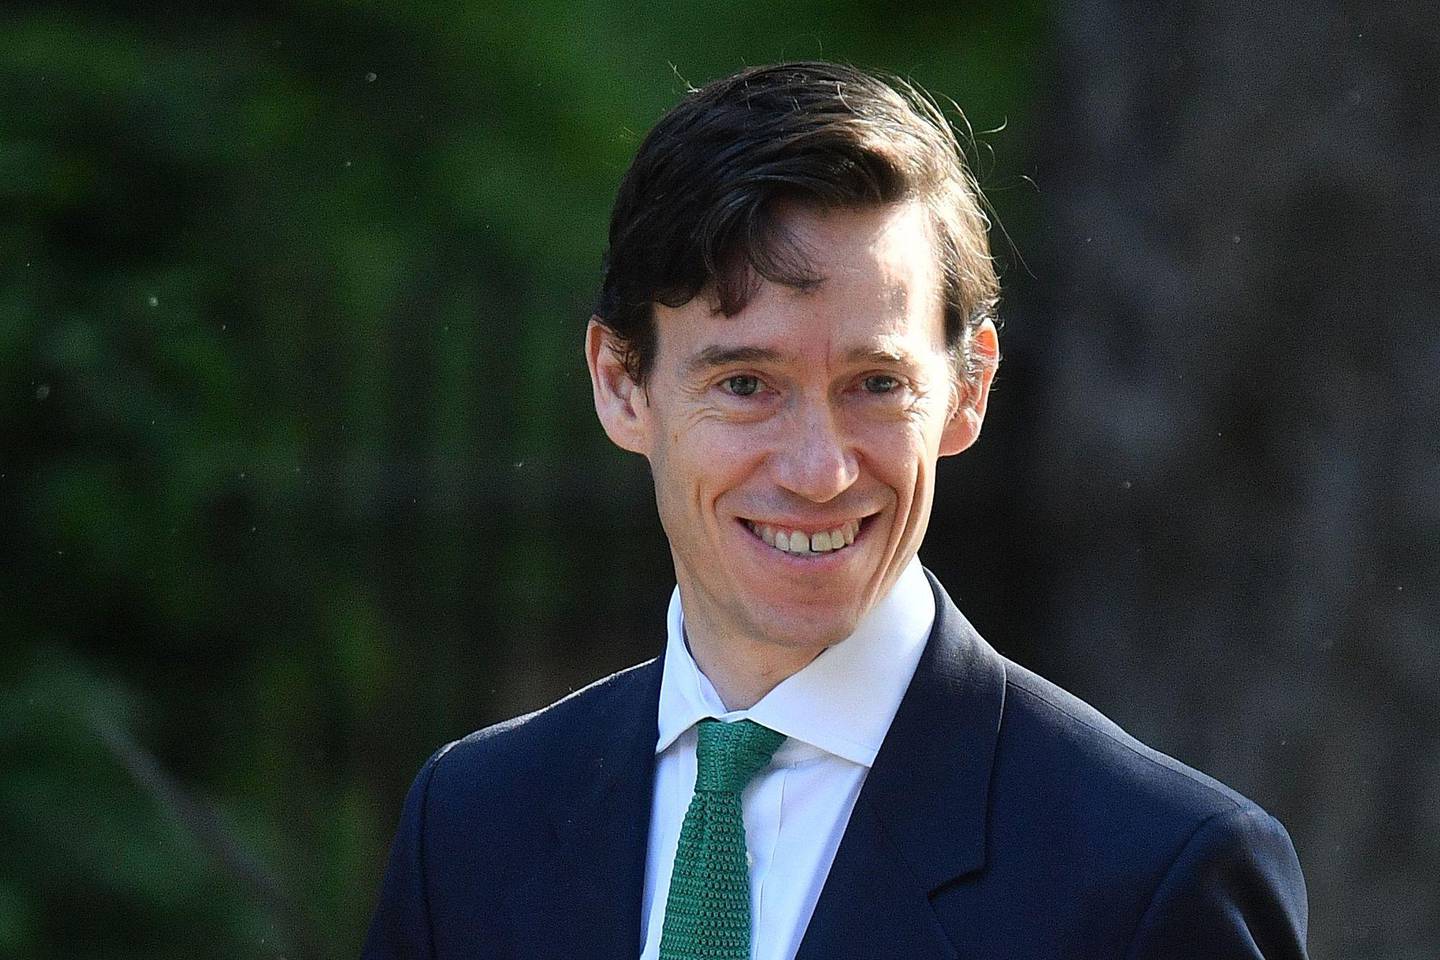 Britain's International Development Secretary Rory Stewart arrives to attend the weekly meeting of the Cabinet at 10 Downing Street in central London on May 21, 2019. (Photo by Daniel LEAL-OLIVAS / AFP)